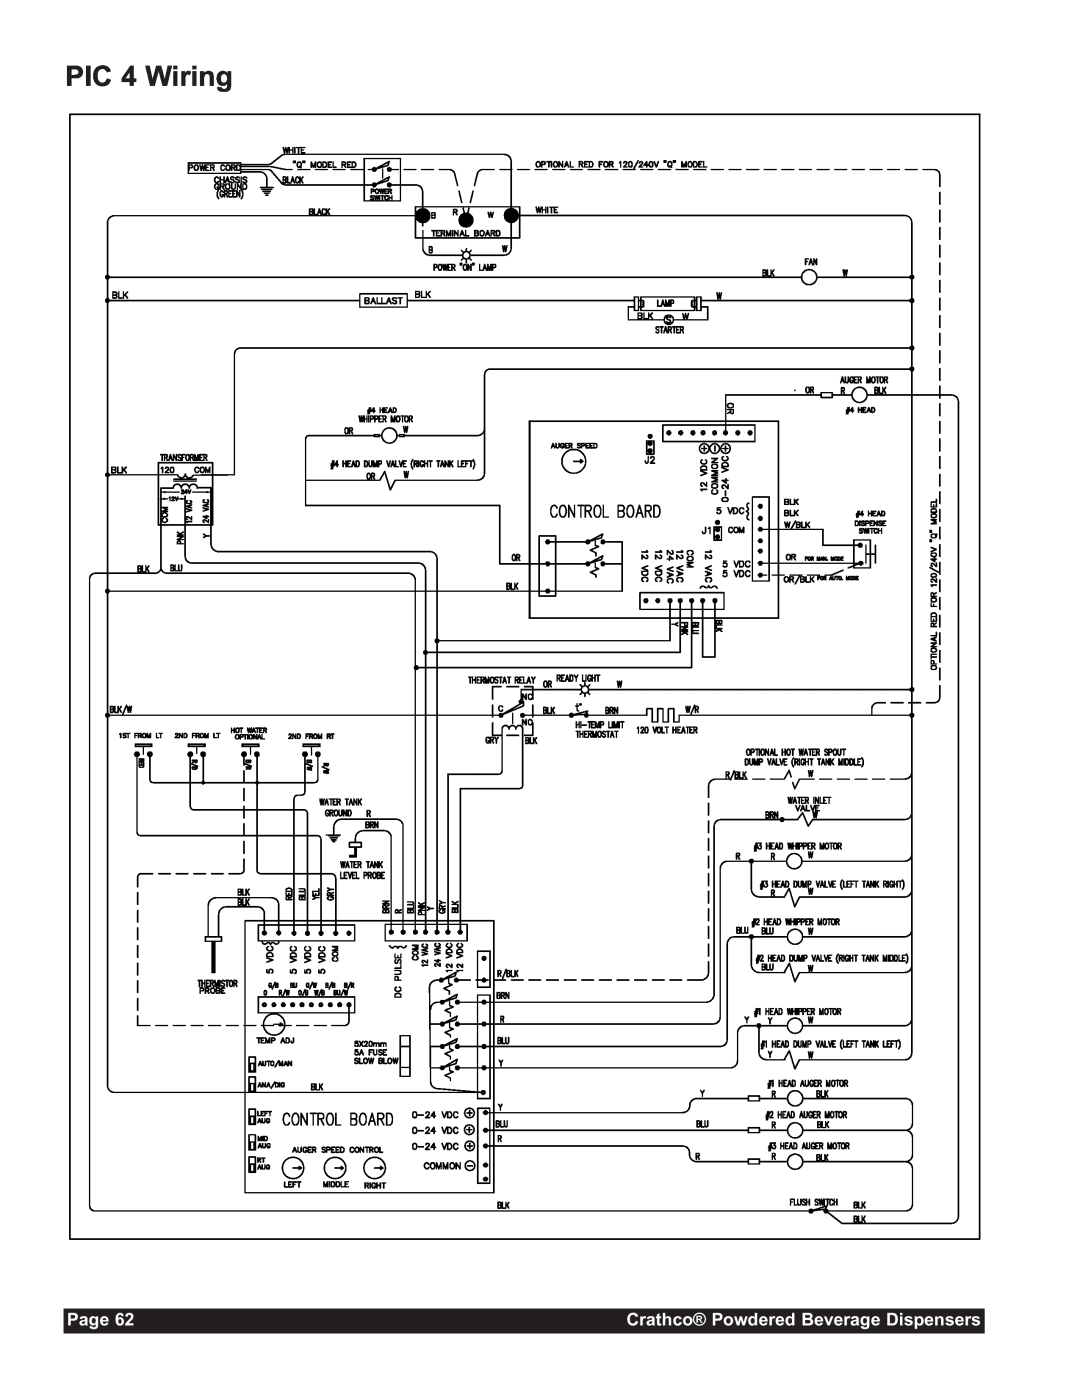 Grindmaster CC-302-20 service manual PIC 4 Wiring, Page, Crathco Powdered Beverage Dispensers 